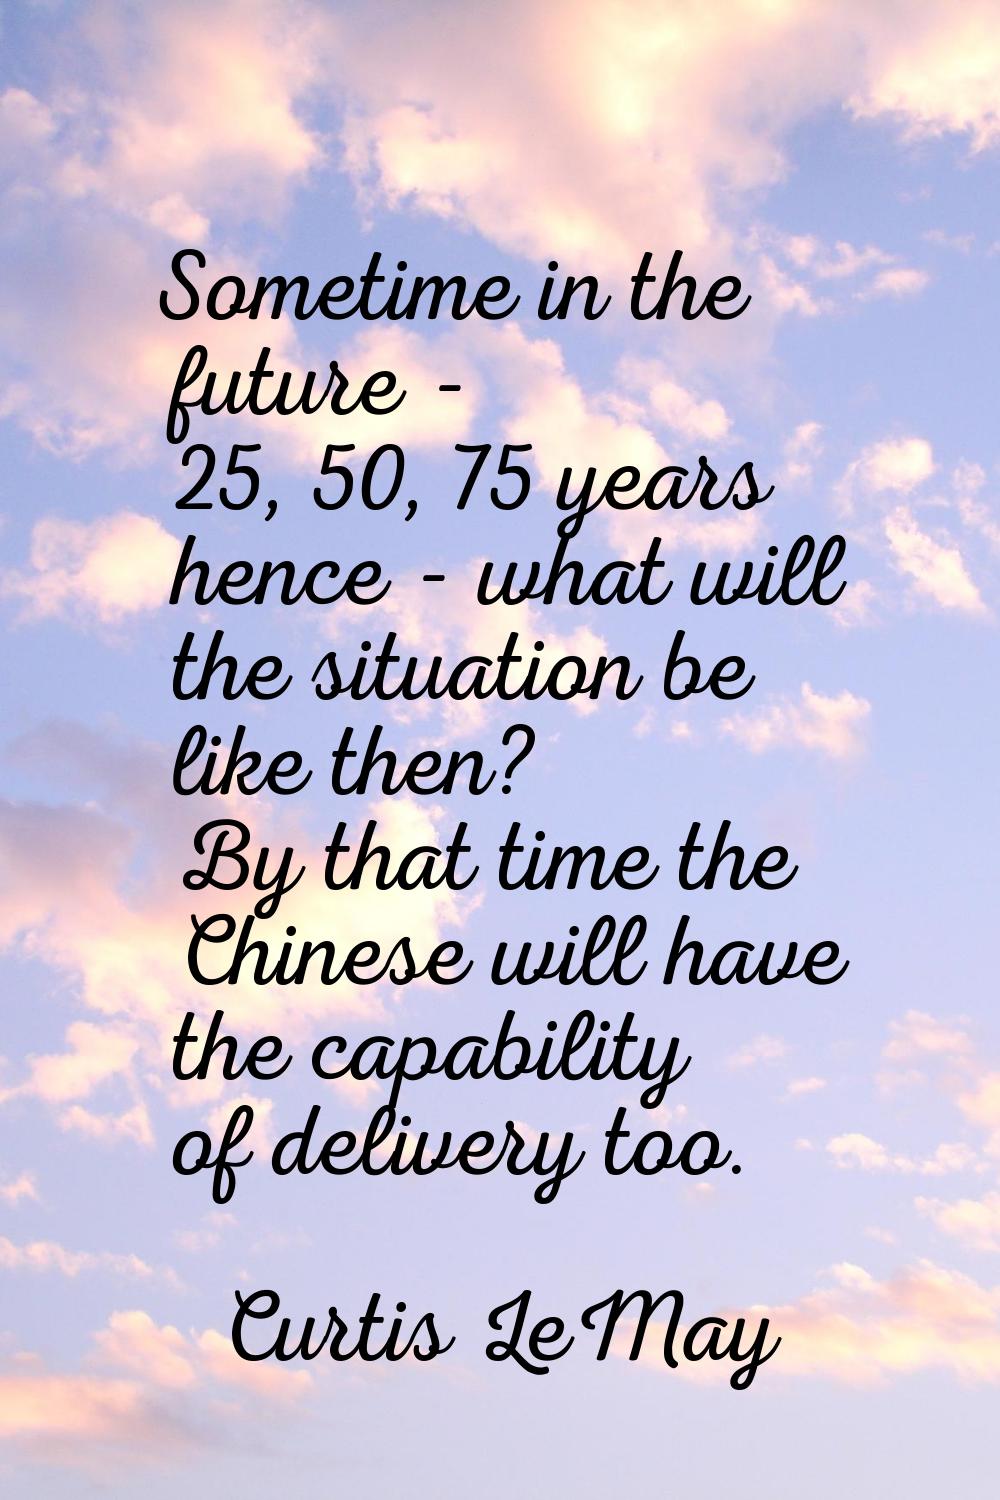 Sometime in the future - 25, 50, 75 years hence - what will the situation be like then? By that tim